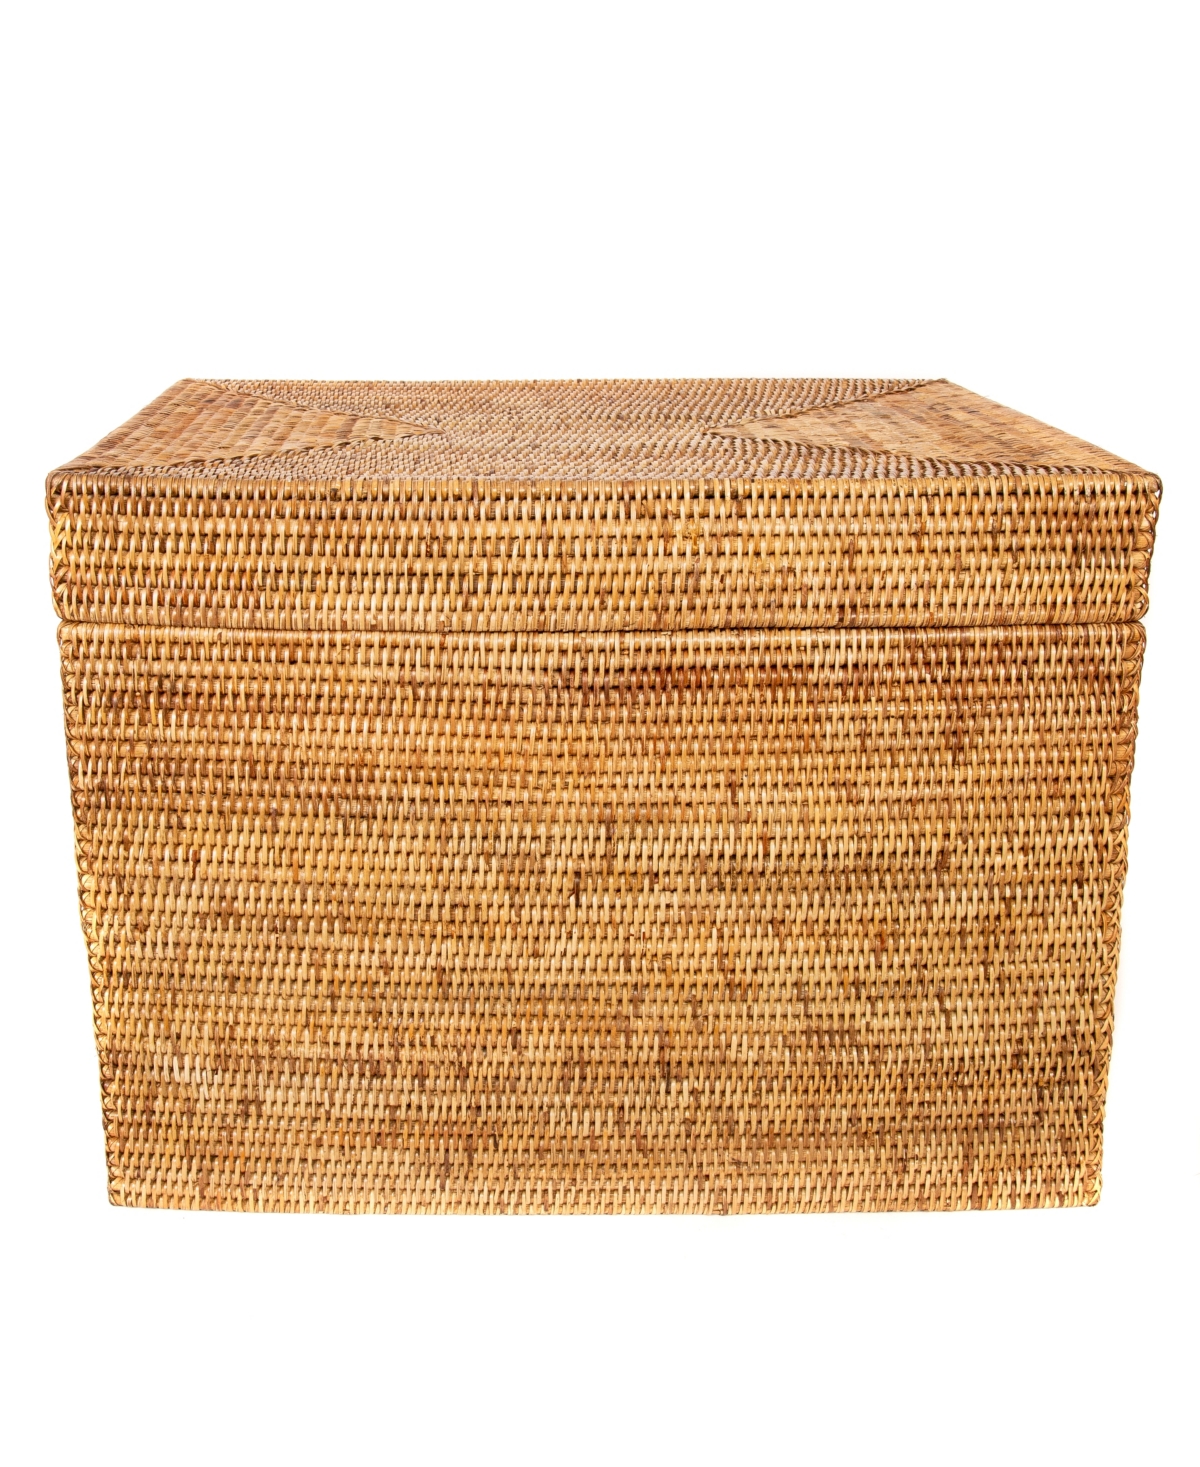 Shop Artifacts Trading Company Artifacts Rattan Rectangular Hinged Chest In Honey Brown